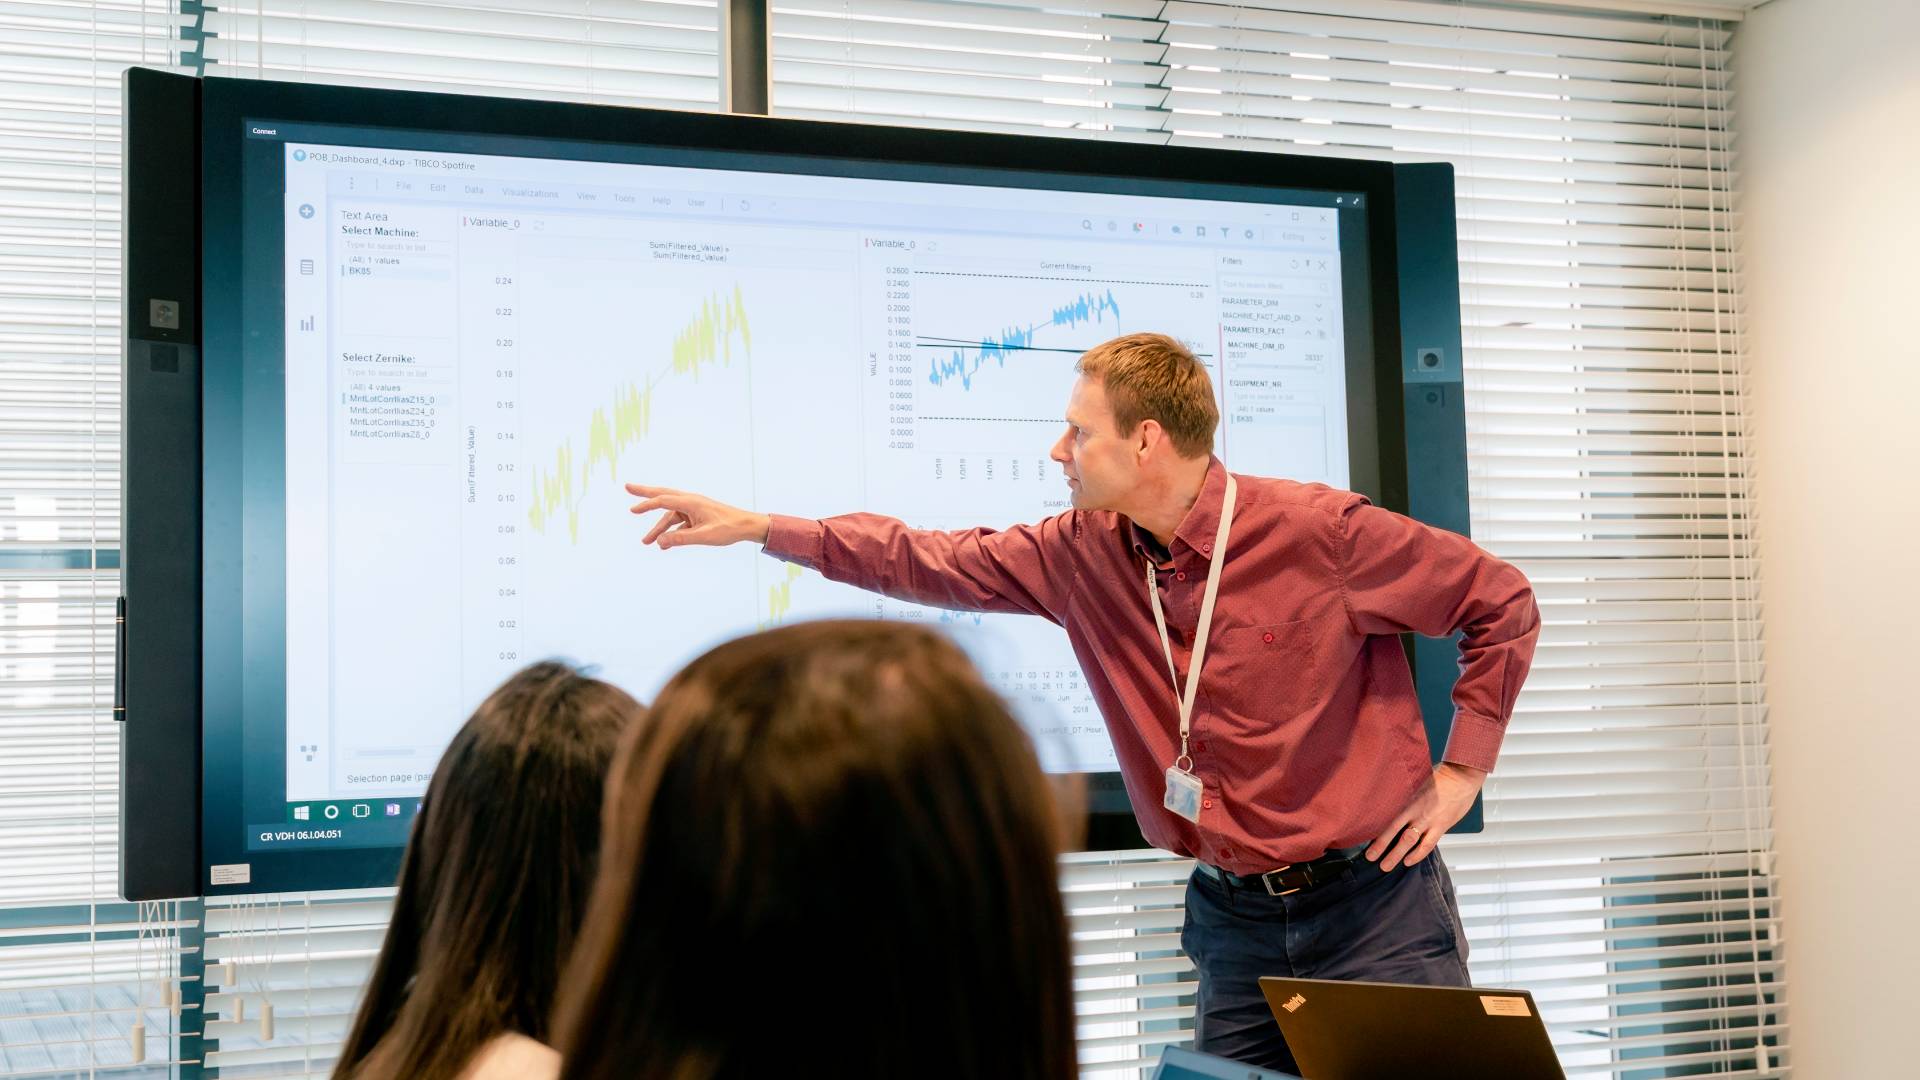 A senior ASML project manager wearing a red shirt presents data insights during a meeting.